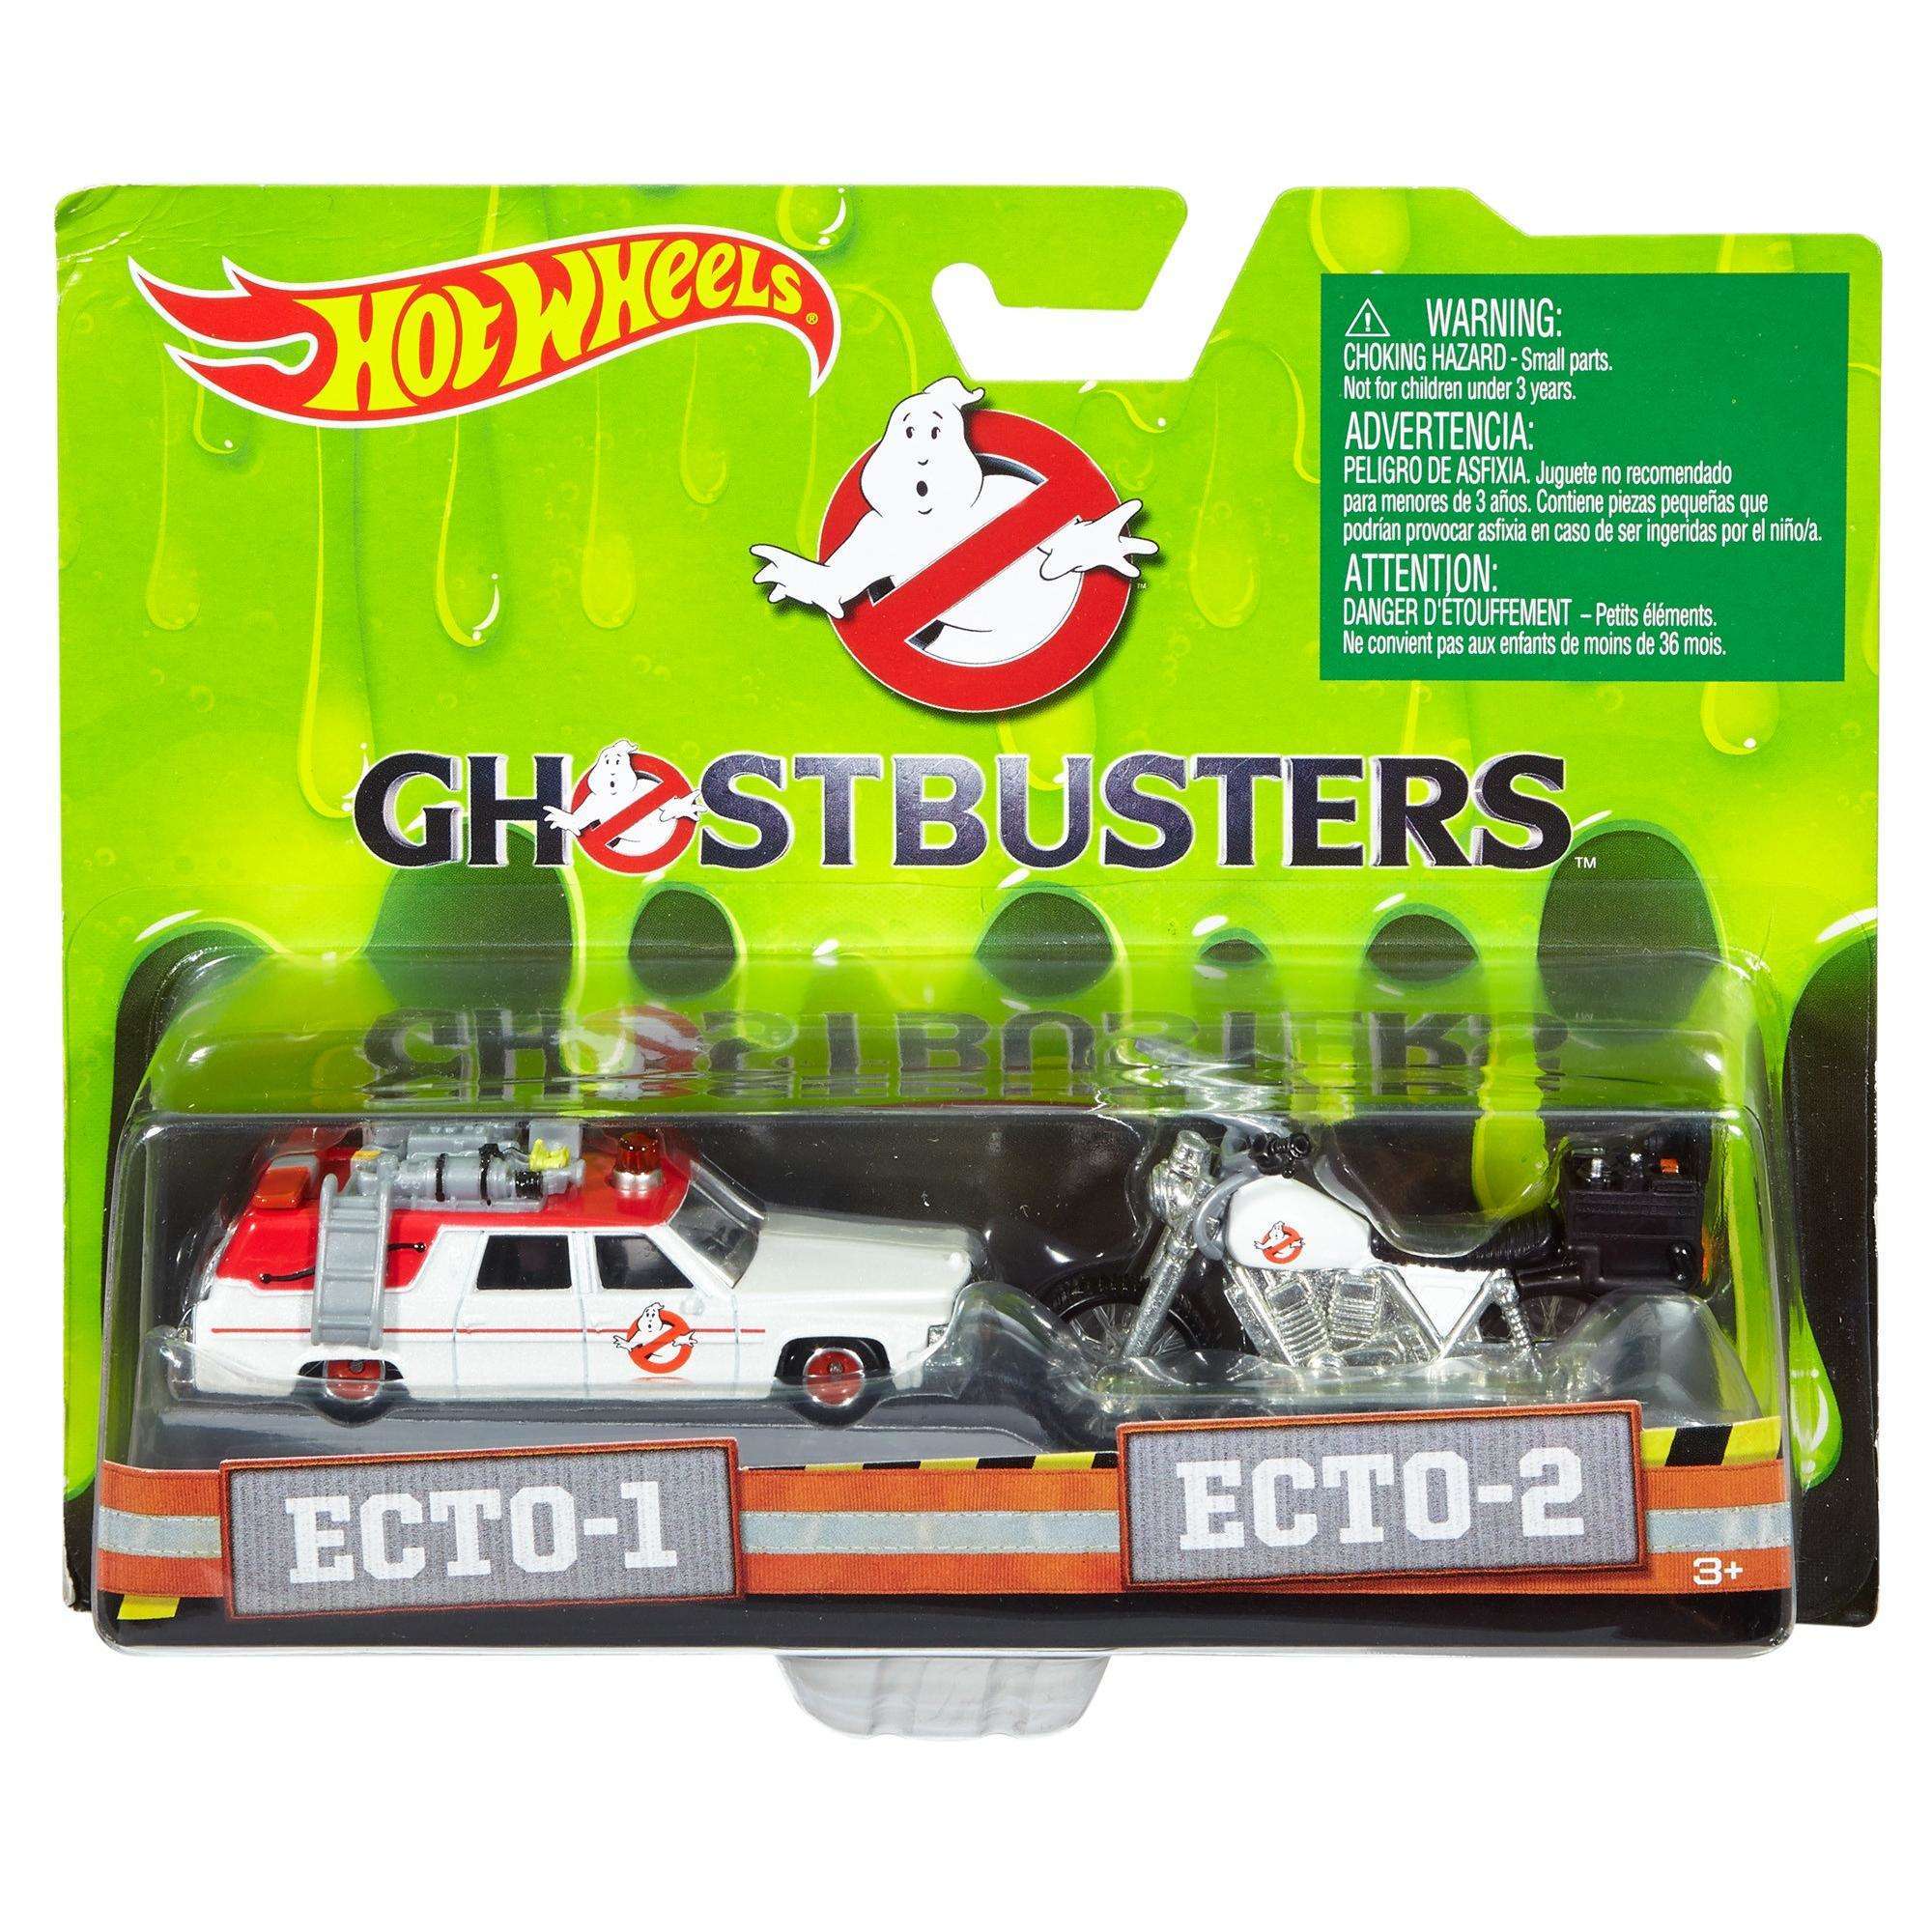 Ghostbusters ECTO-1 and ECTO-2 Vehicles - image 3 of 3